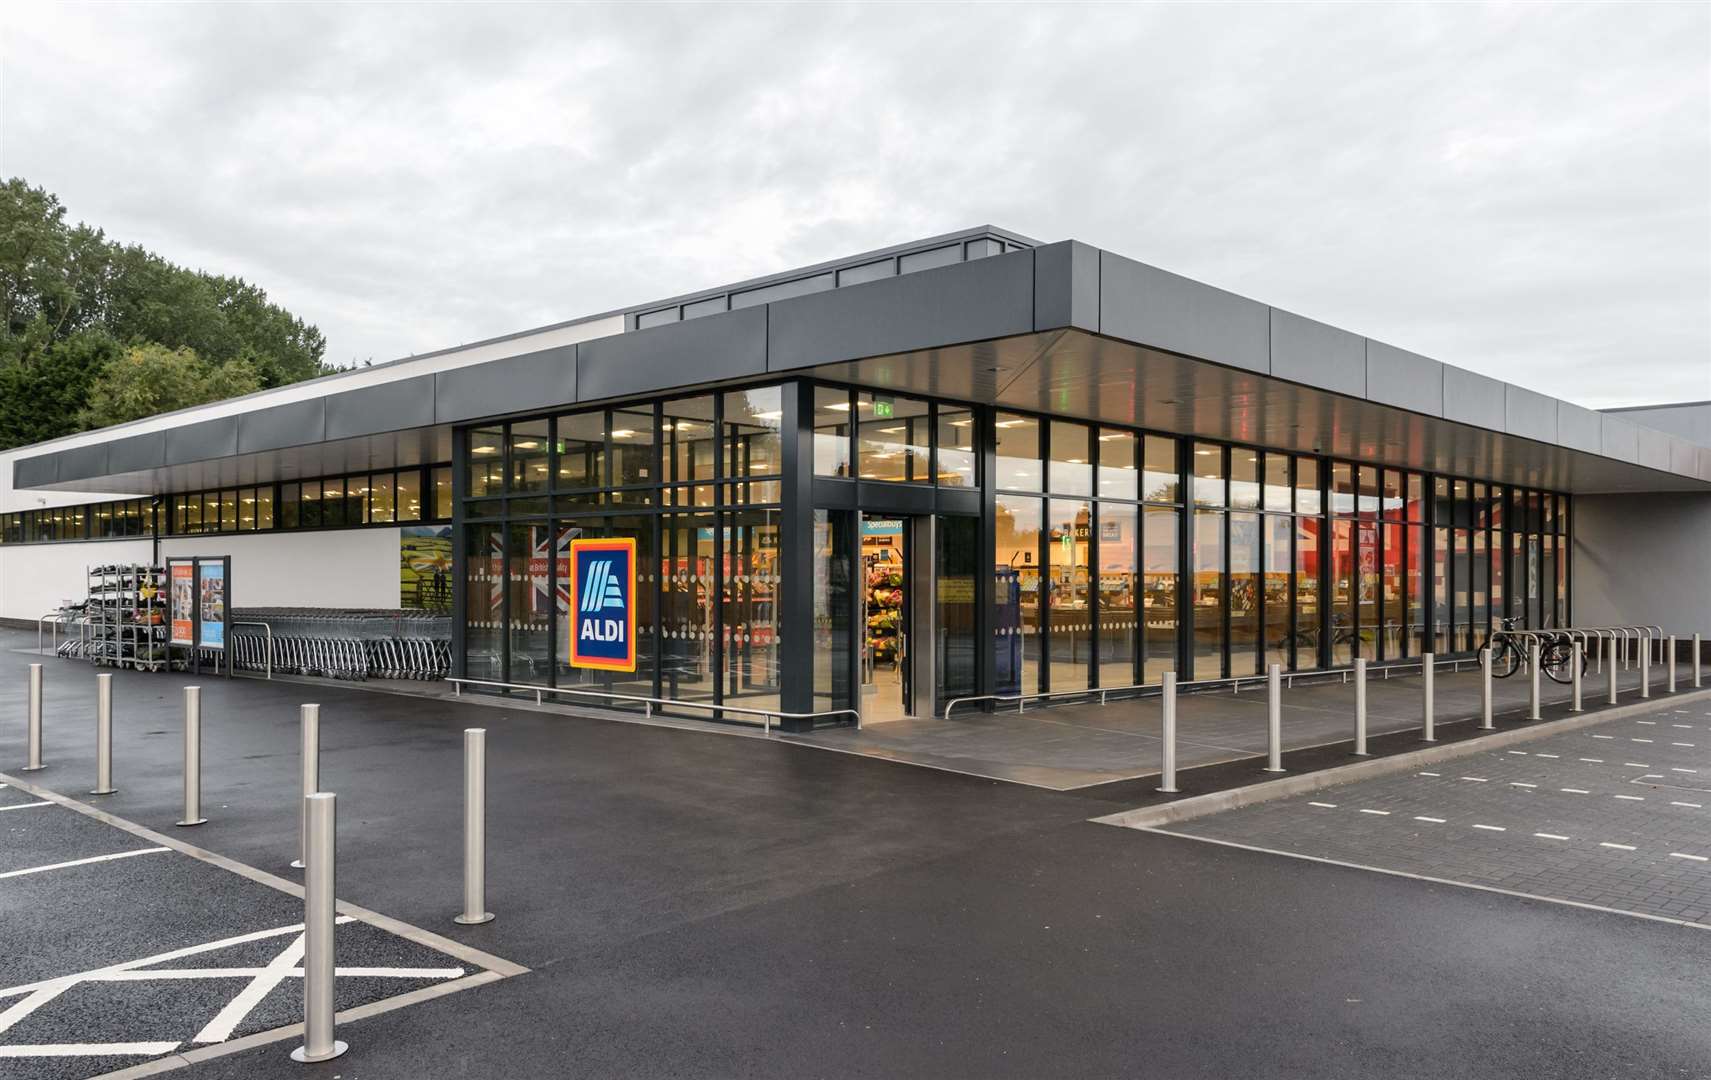 Aldi is investing heavily in the county - creating new stores and additional jobs. Picture: Aldi/Simon Hadley Photography